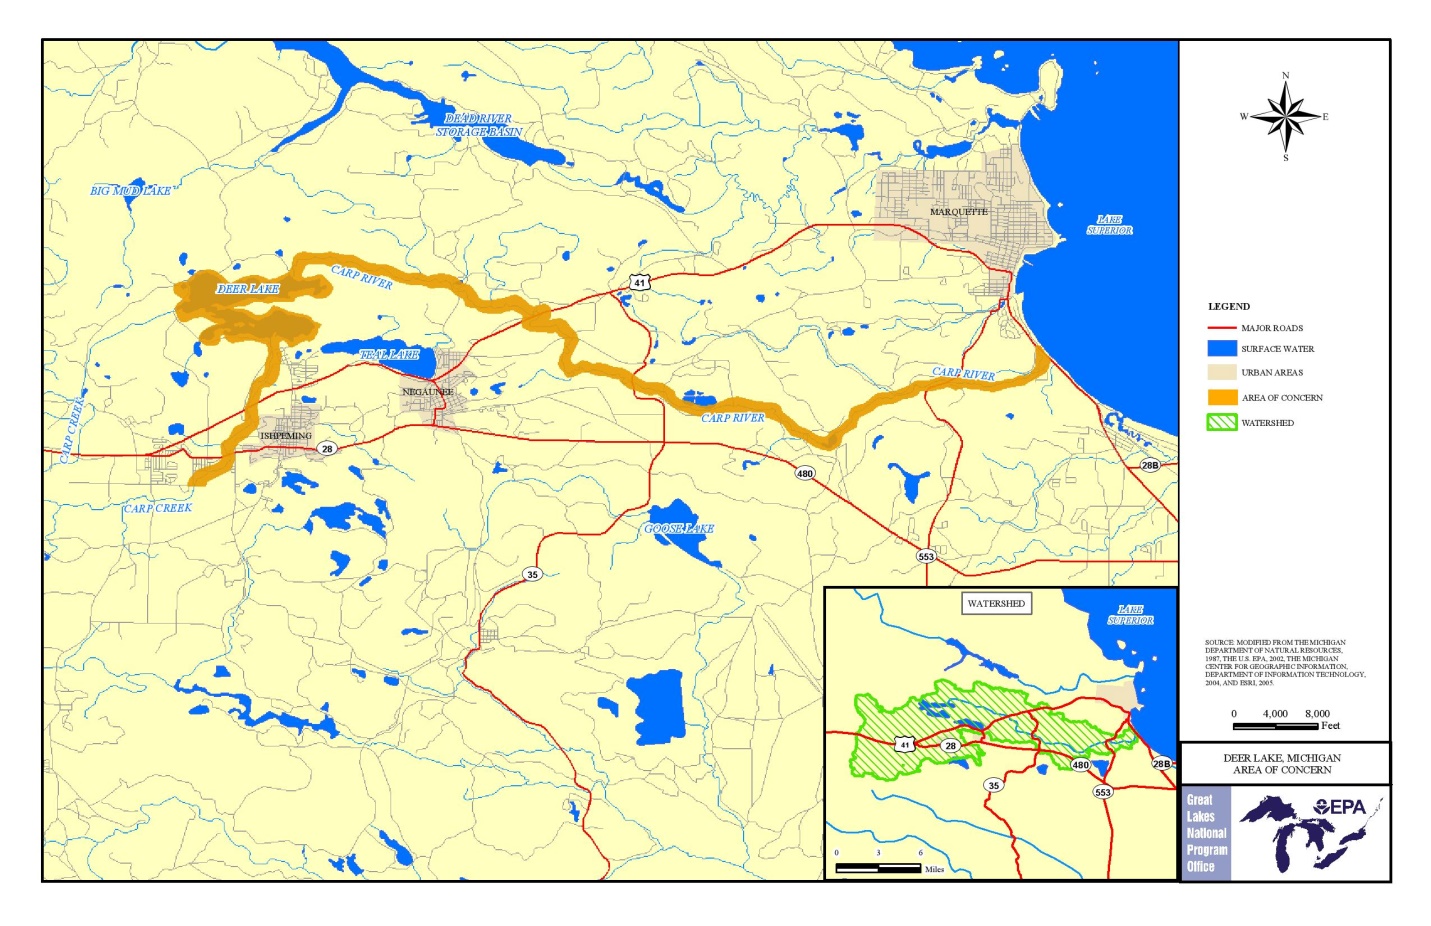 A boundary map of the Deer Lake Area of Concern. Credit: EPA.